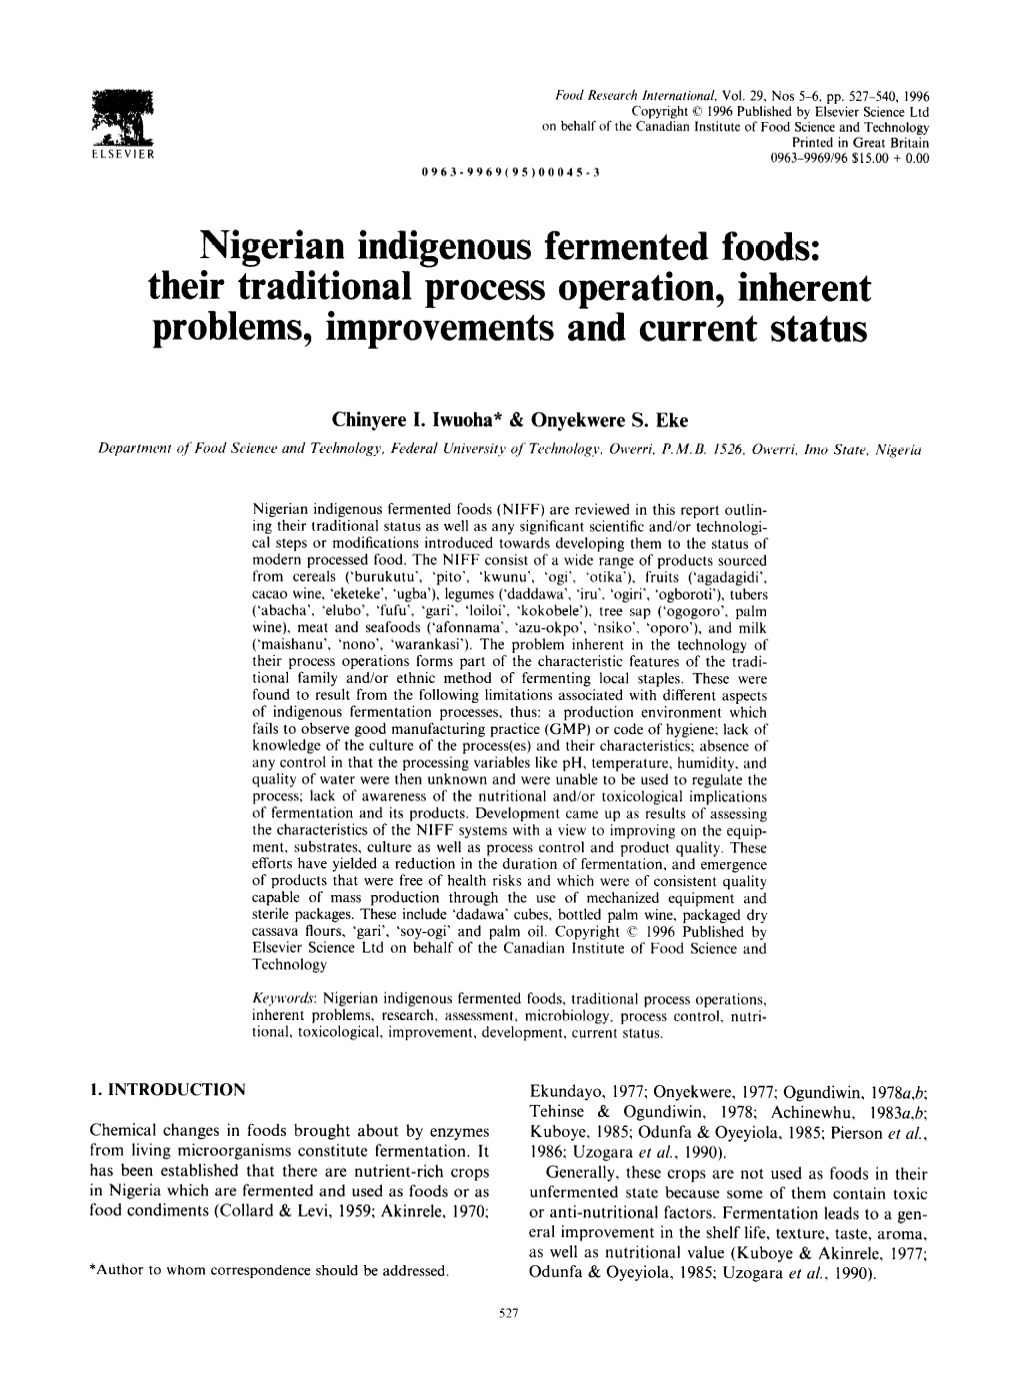 Nigerian Indigenous Fermented Foods: Their Traditional Process Operation, Inherent Problems, Improvements and Current Status